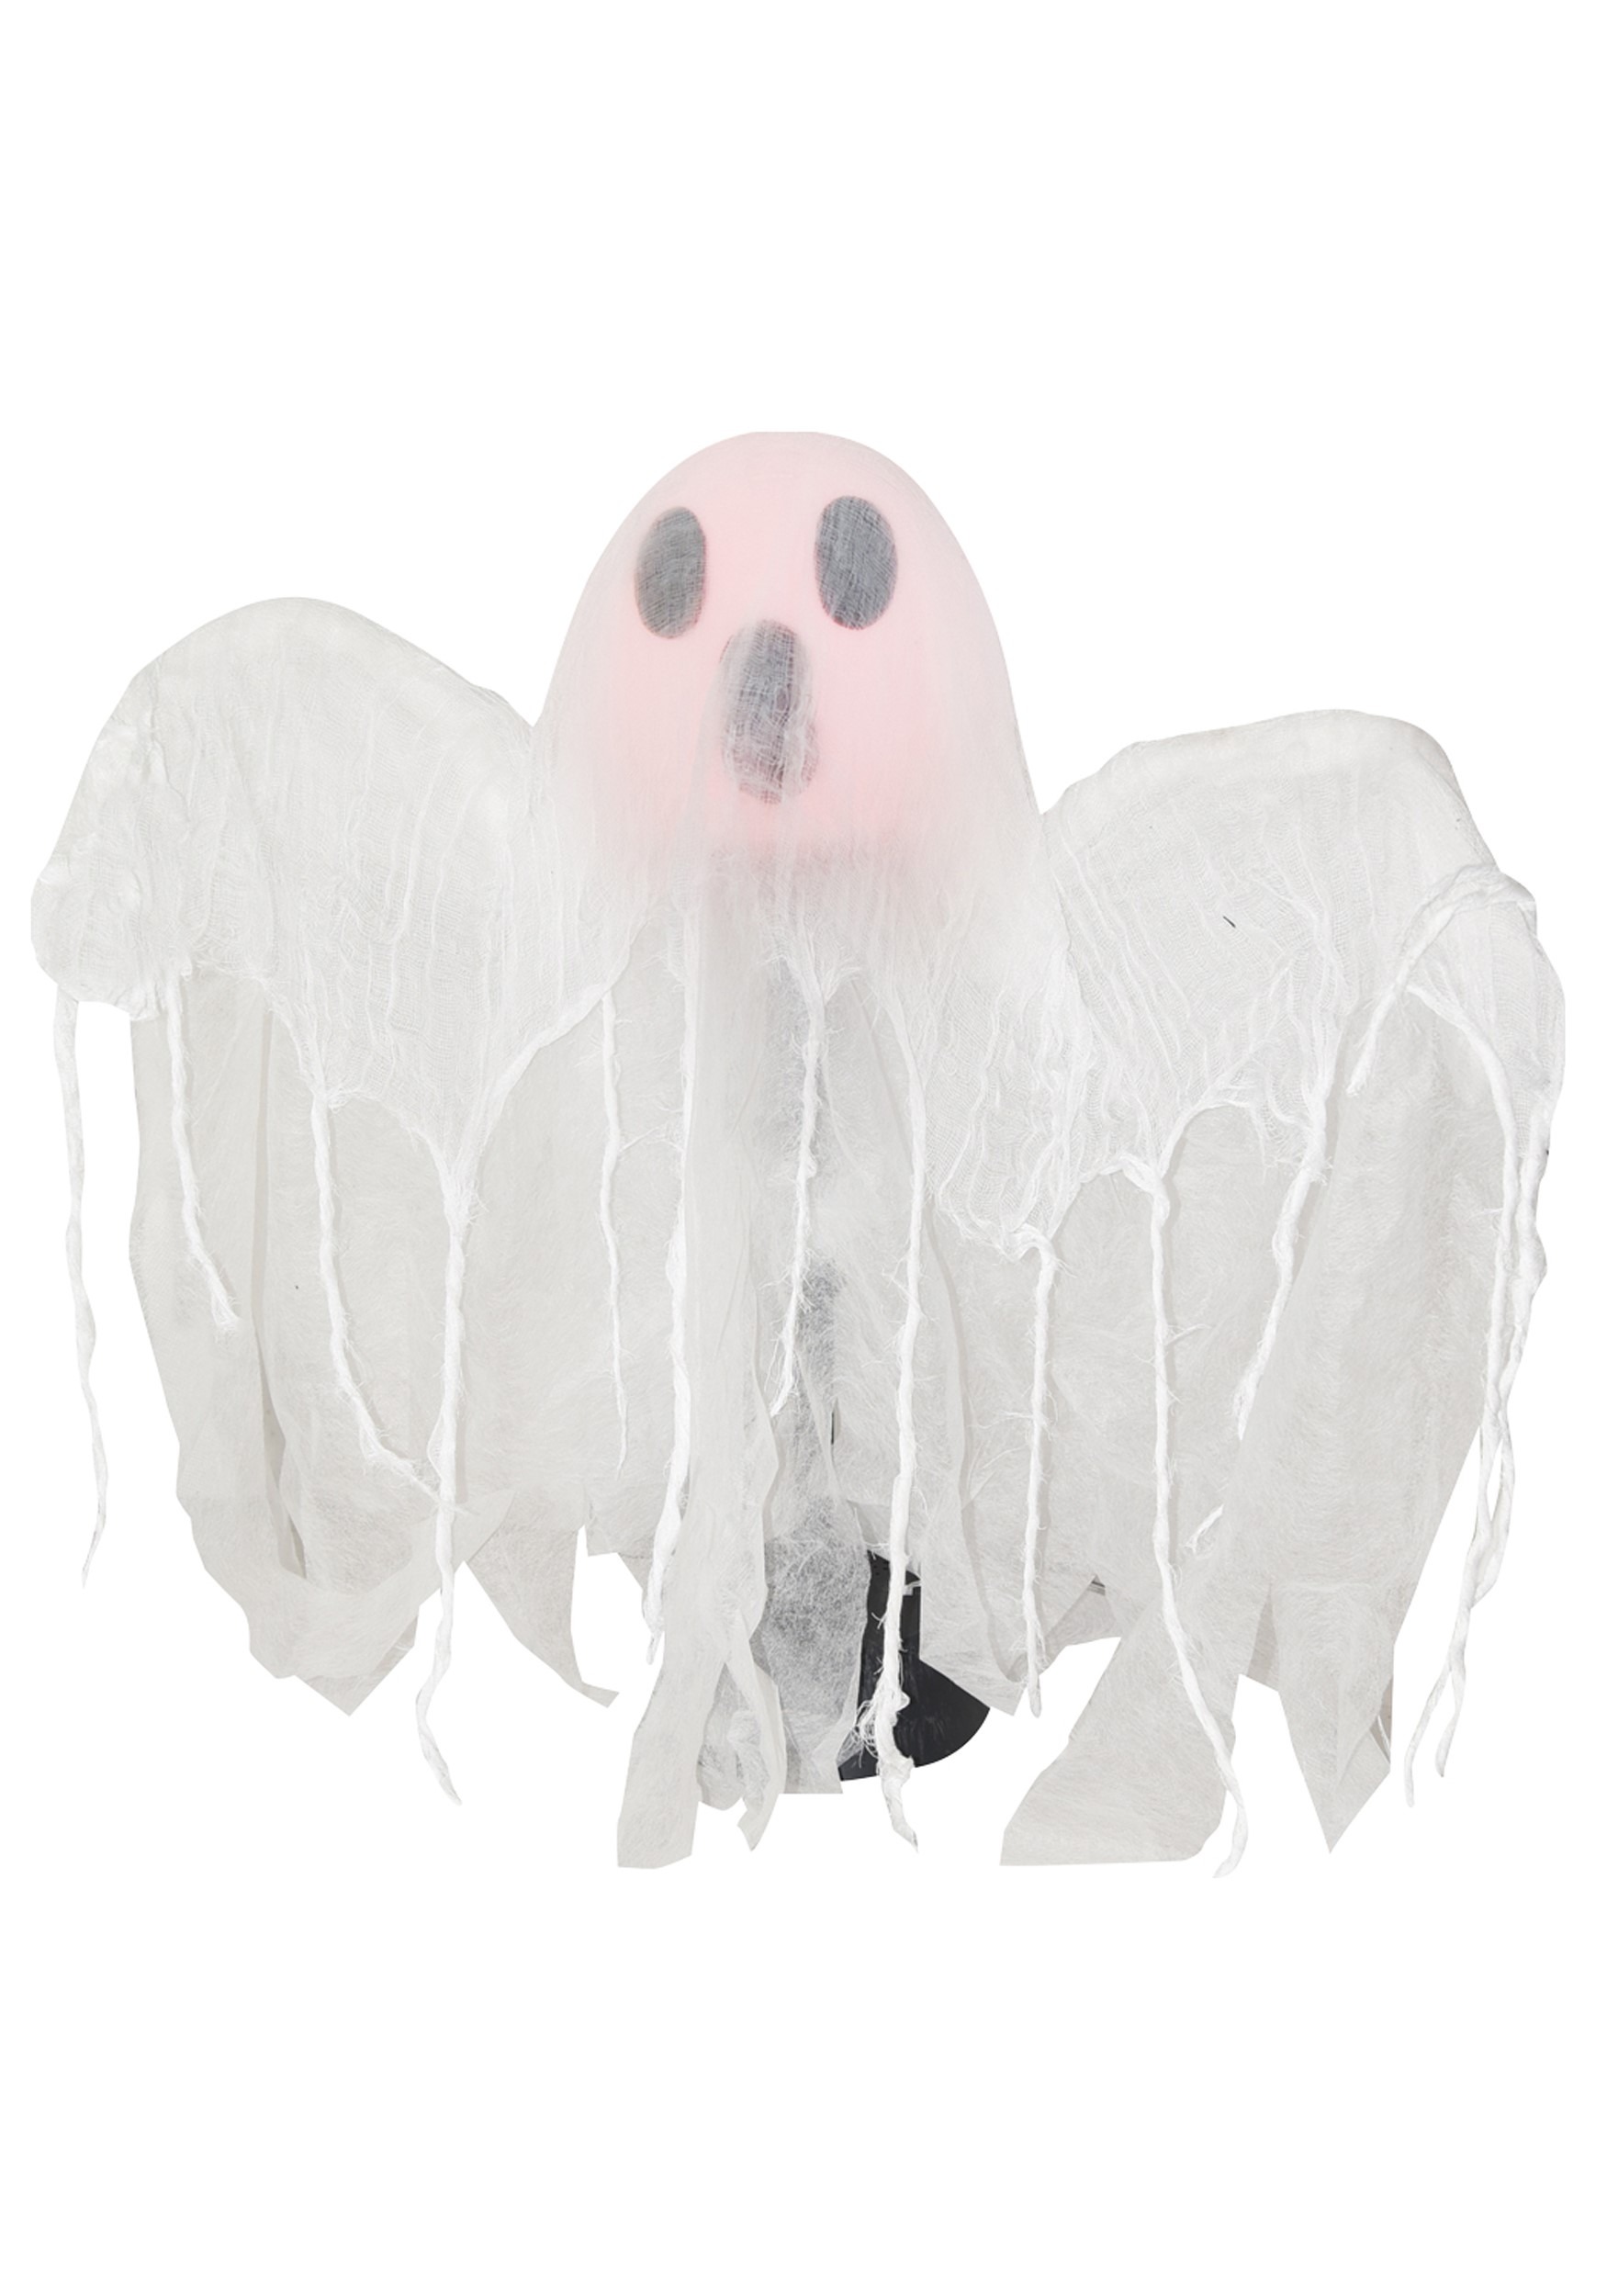 Decorative Animated Pop Up Ghost